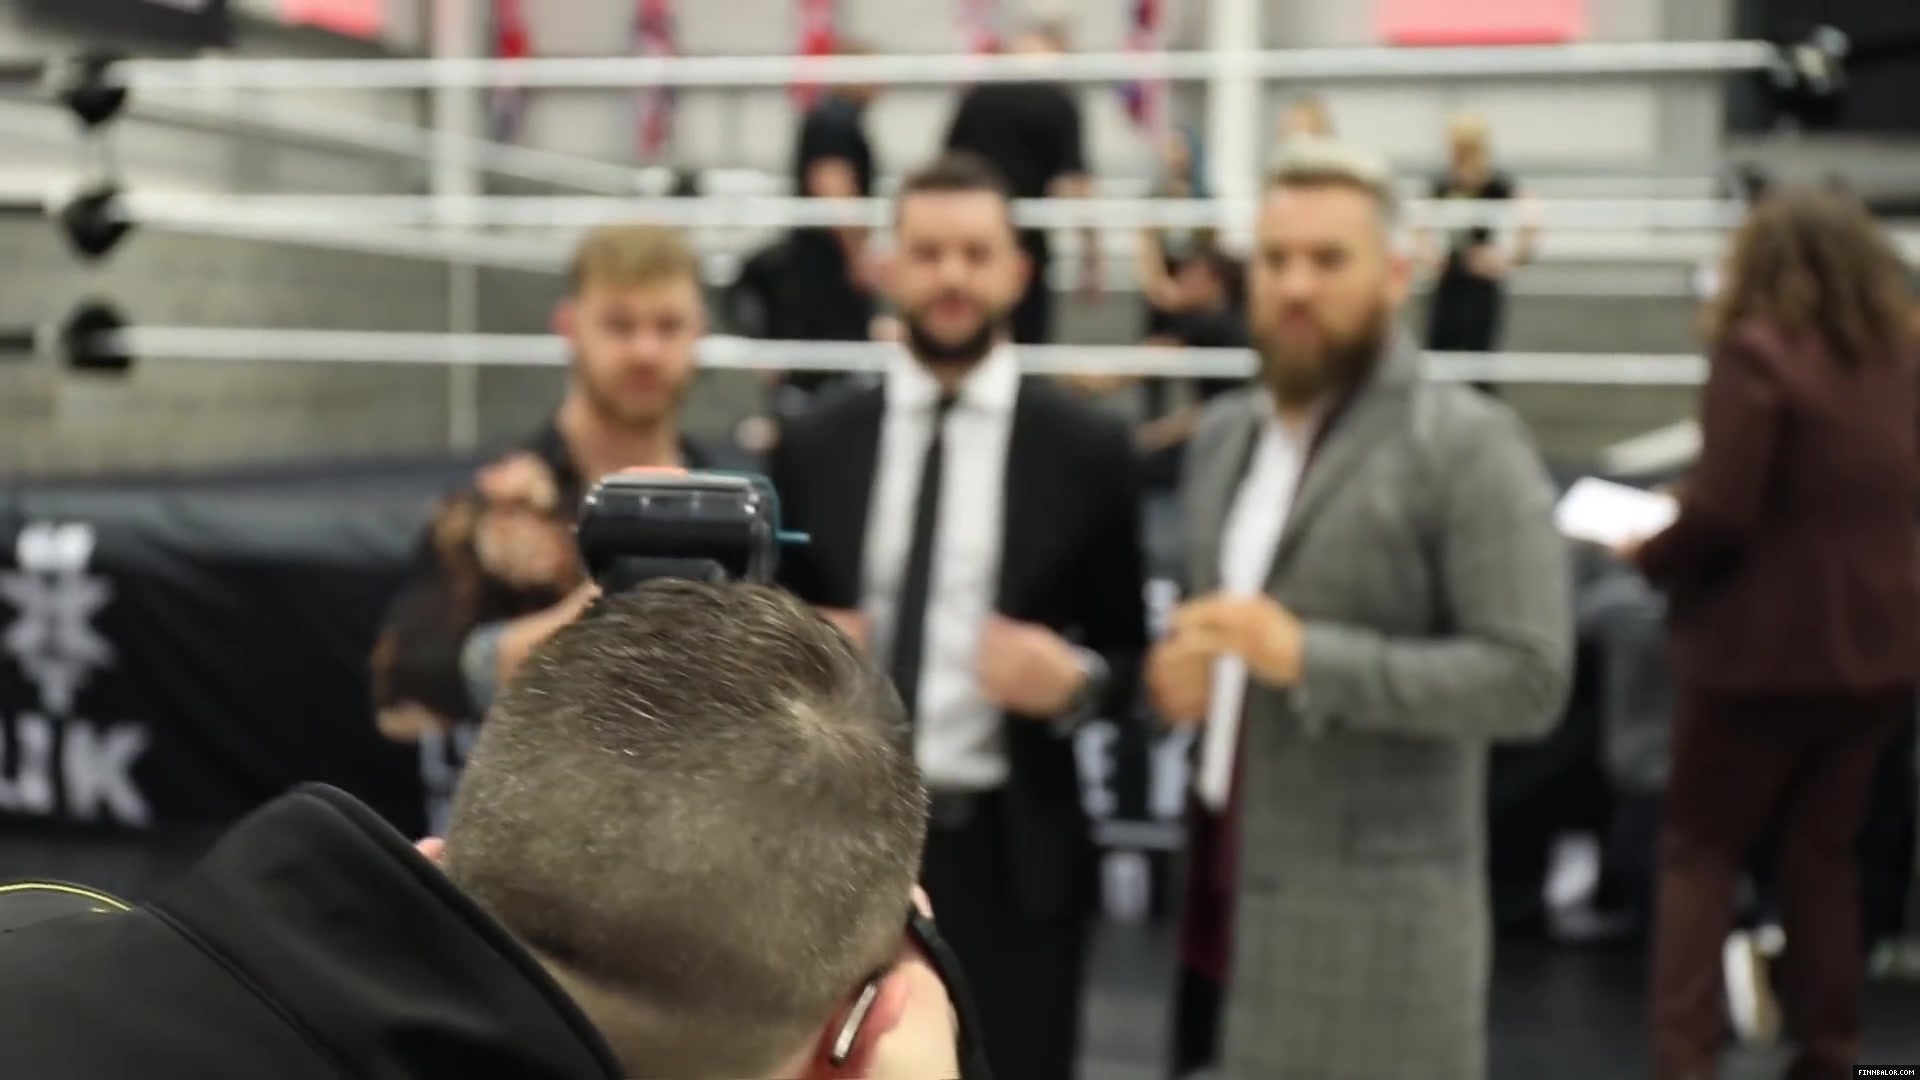 WWE_Superstar_FINN_BALOR_joins_MOUSTACHE_MOUNTAIN_at_the_opening_of_the_NXT_UK_PC_034.jpg